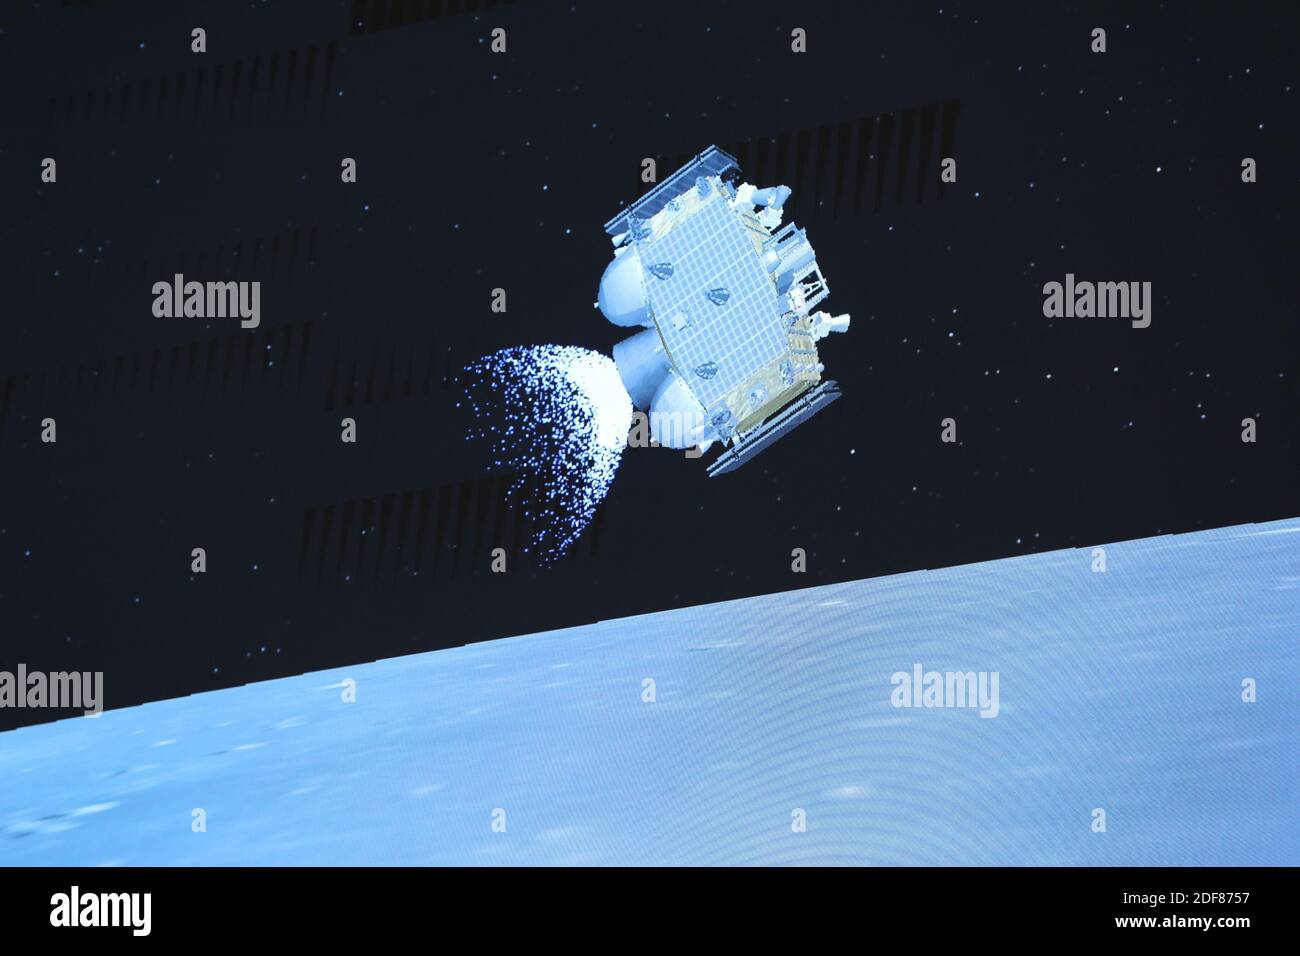 Beijing, China. 3rd Dec, 2020. Photo taken at Beijing Aerospace Control Center (BACC) in Beijing on Dec. 3, 2020 shows the ascender of Chang'e-5 spacecraft flying above the lunar surface. The Chinese spacecraft carrying the country's first lunar samples blasted off from the moon late Thursday, the China National Space Administration announced. This represented the first-ever Chinese spacecraft to take off from an extraterrestrial body. Credit: Jin Liwang/Xinhua/Alamy Live News Credit: Xinhua/Alamy Live News Stock Photo